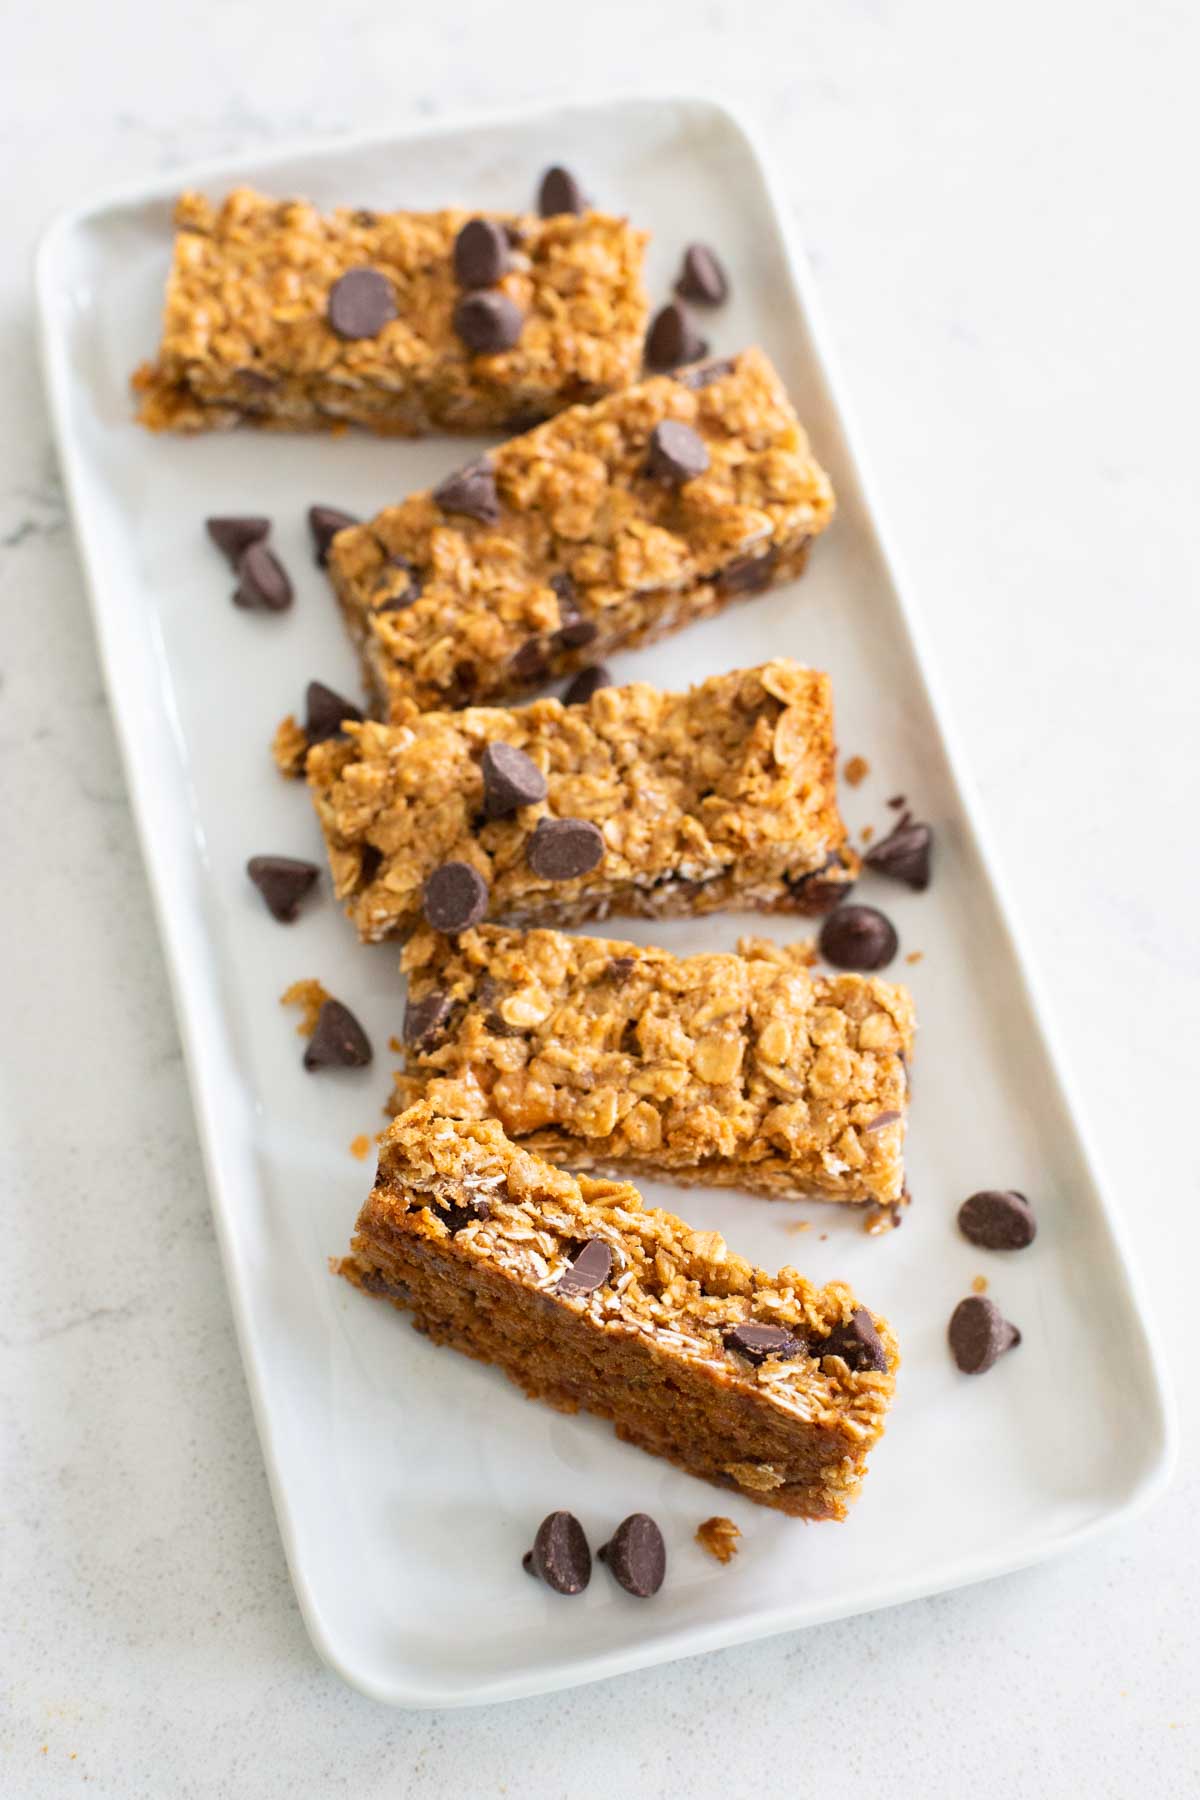 A platter of granola bars are ready to be served.